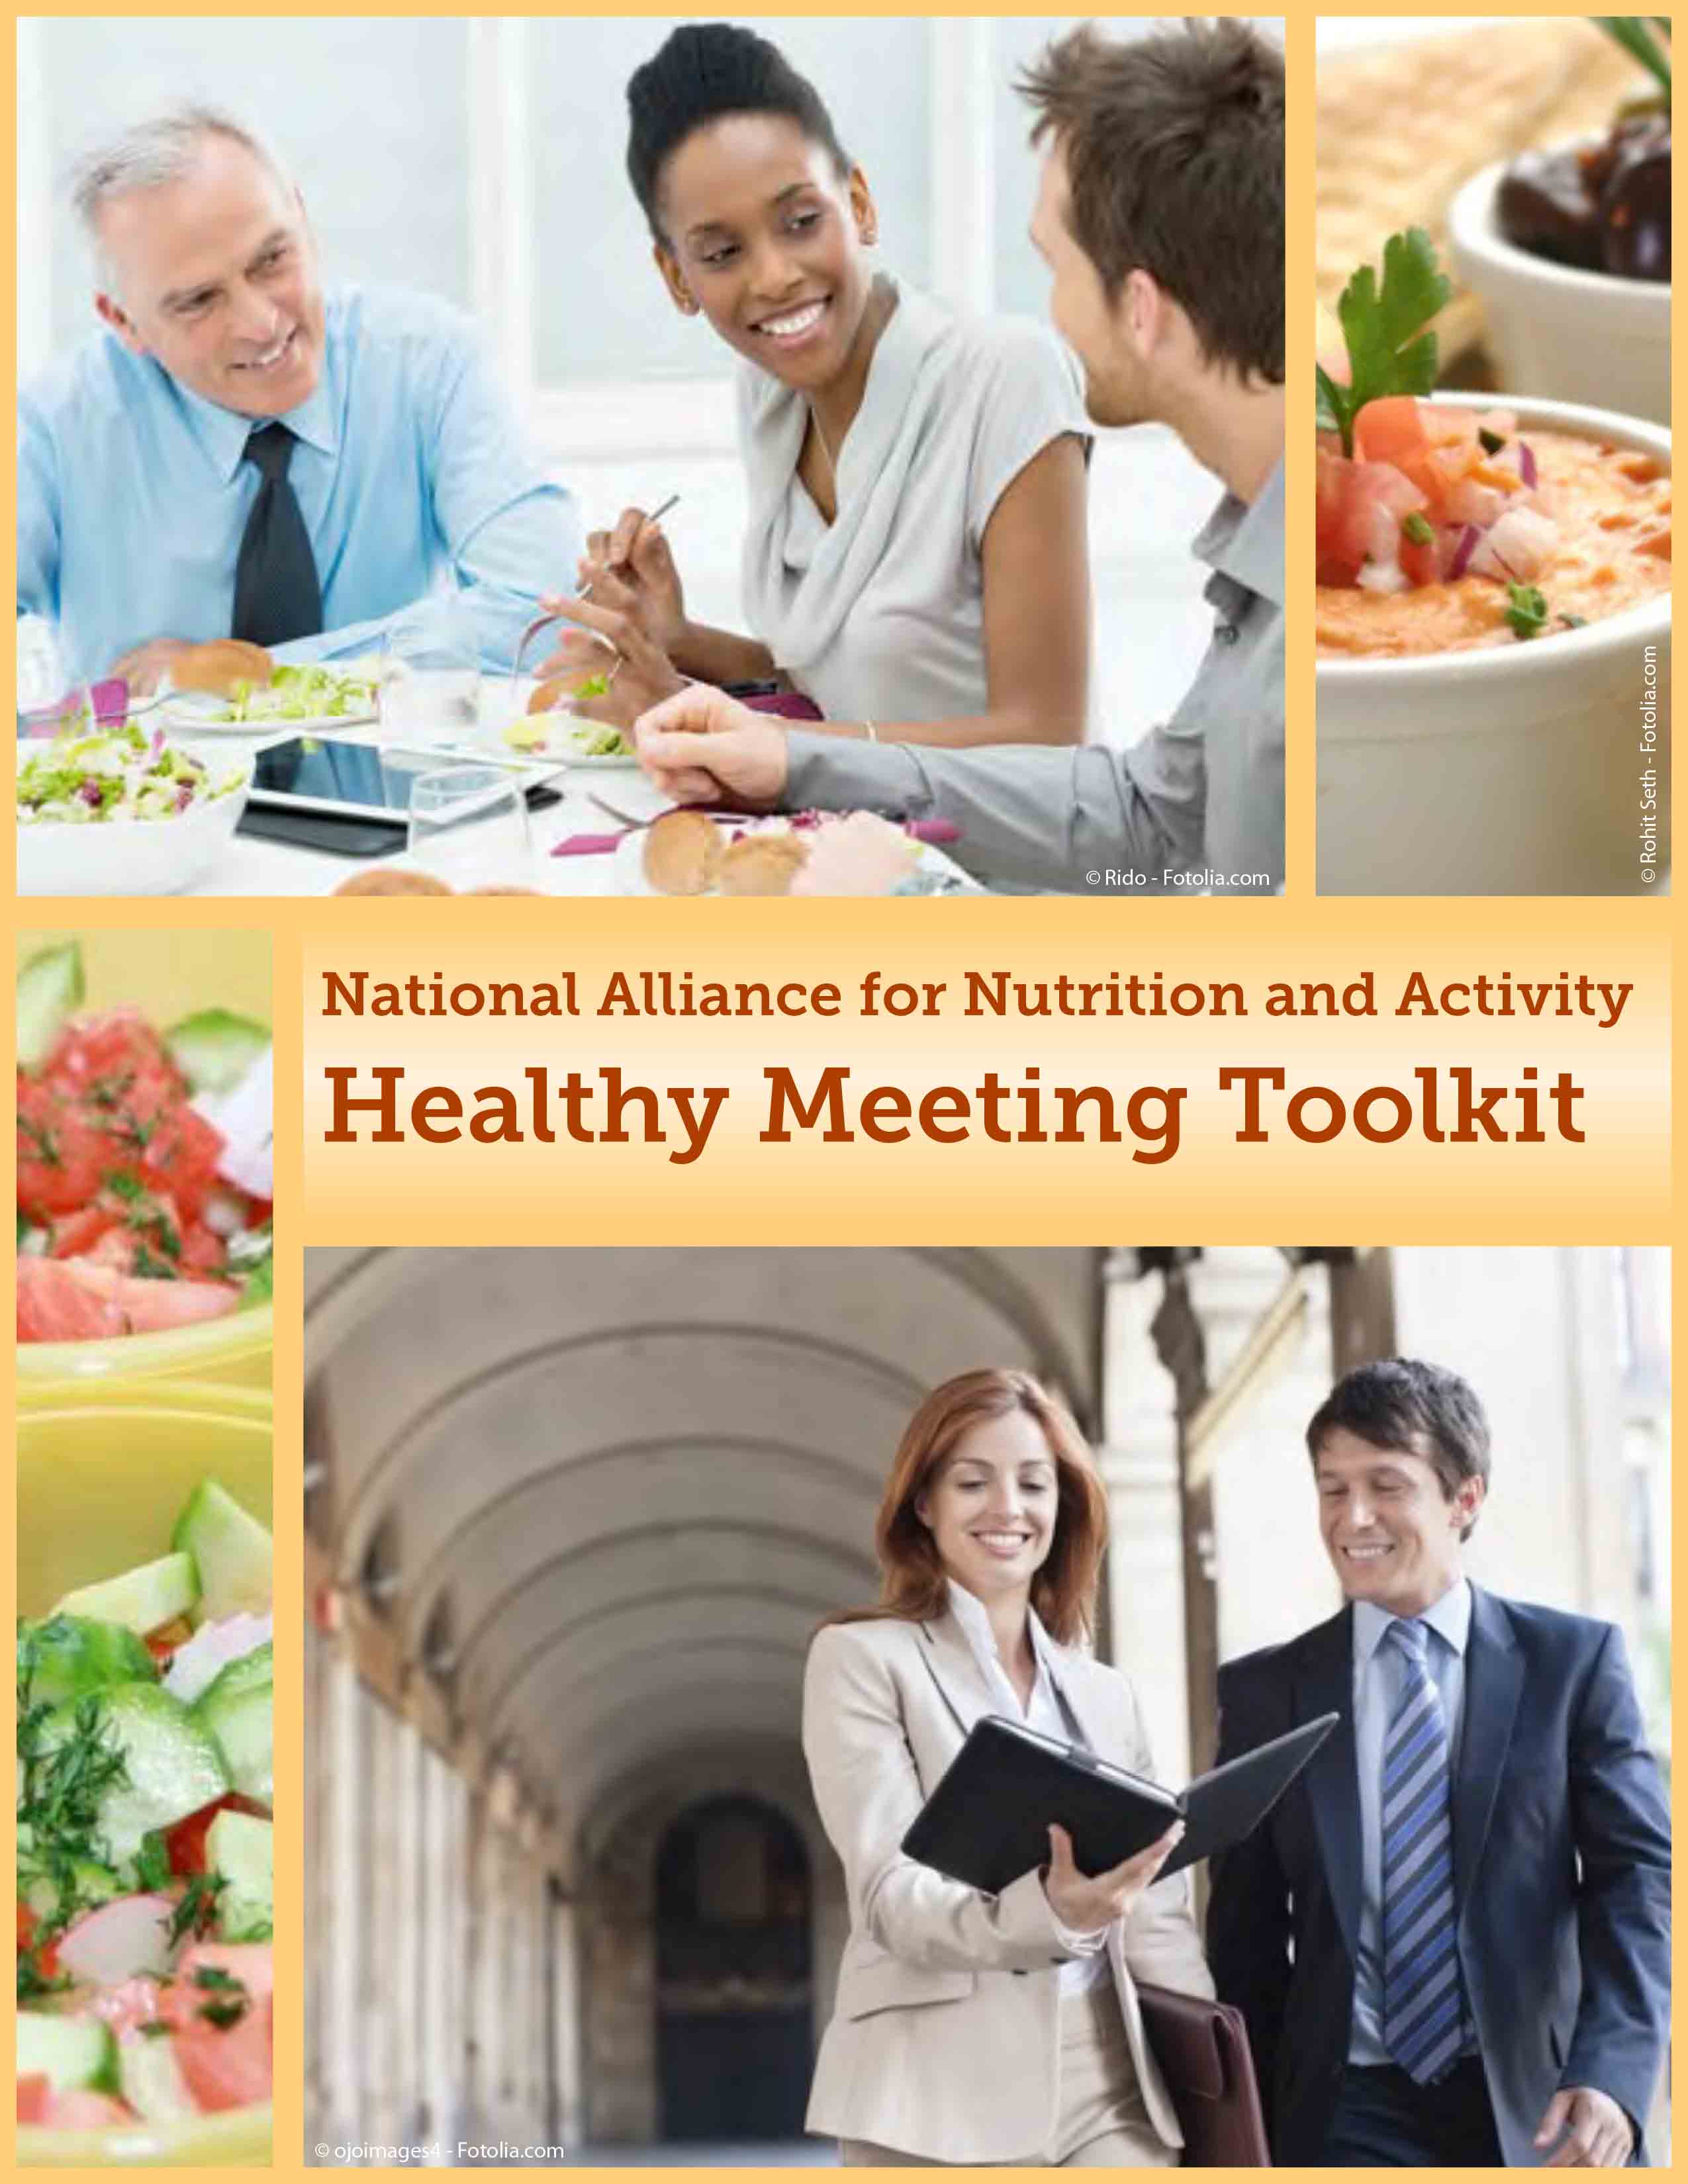 National Alliance for Nutrition and Activity Healthy Meeting Toolkit